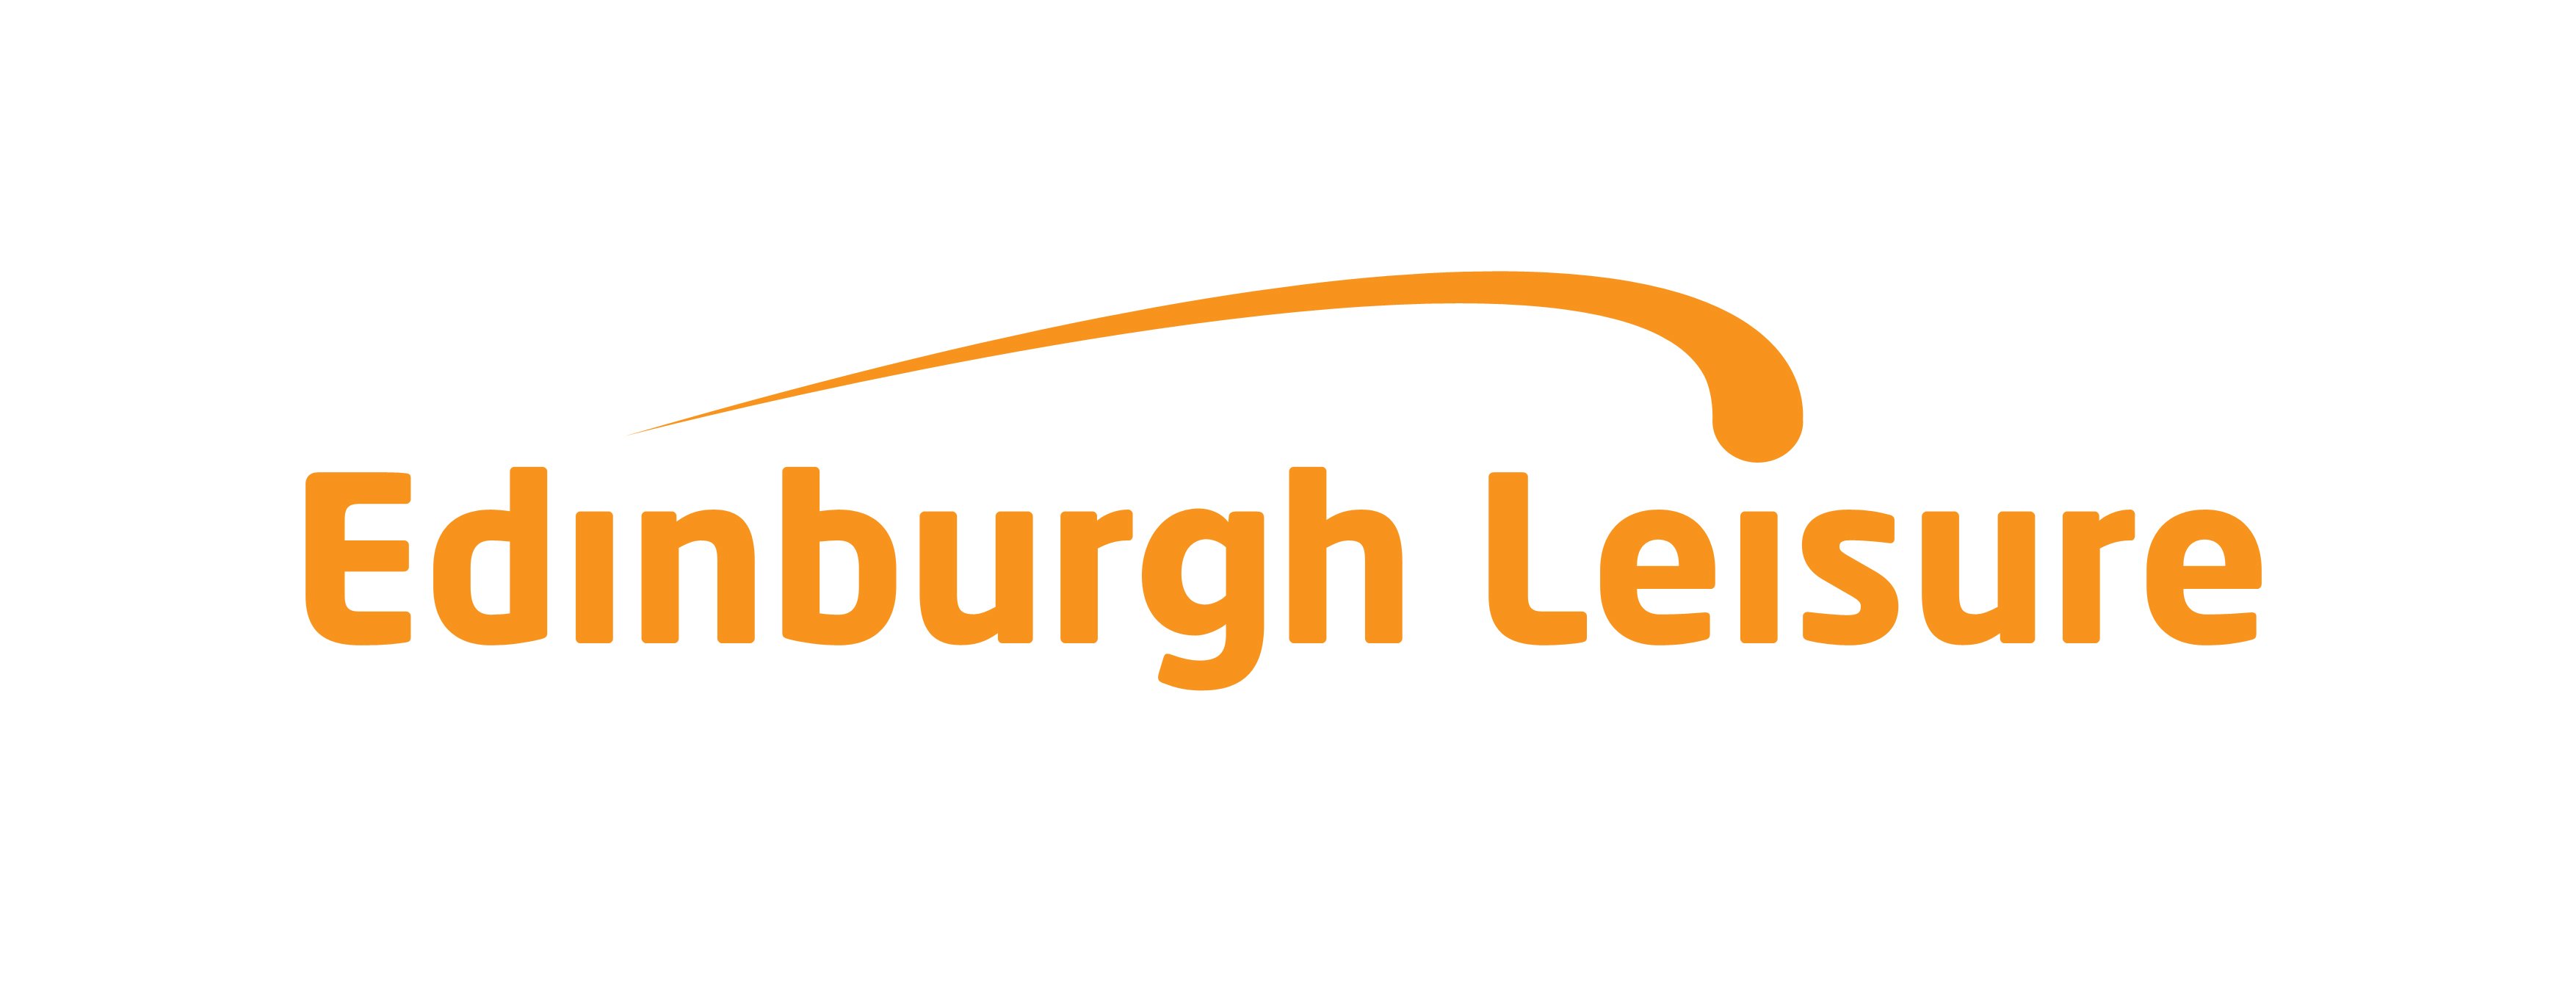 ReferAll is proud to be working with Edinburgh Leisure